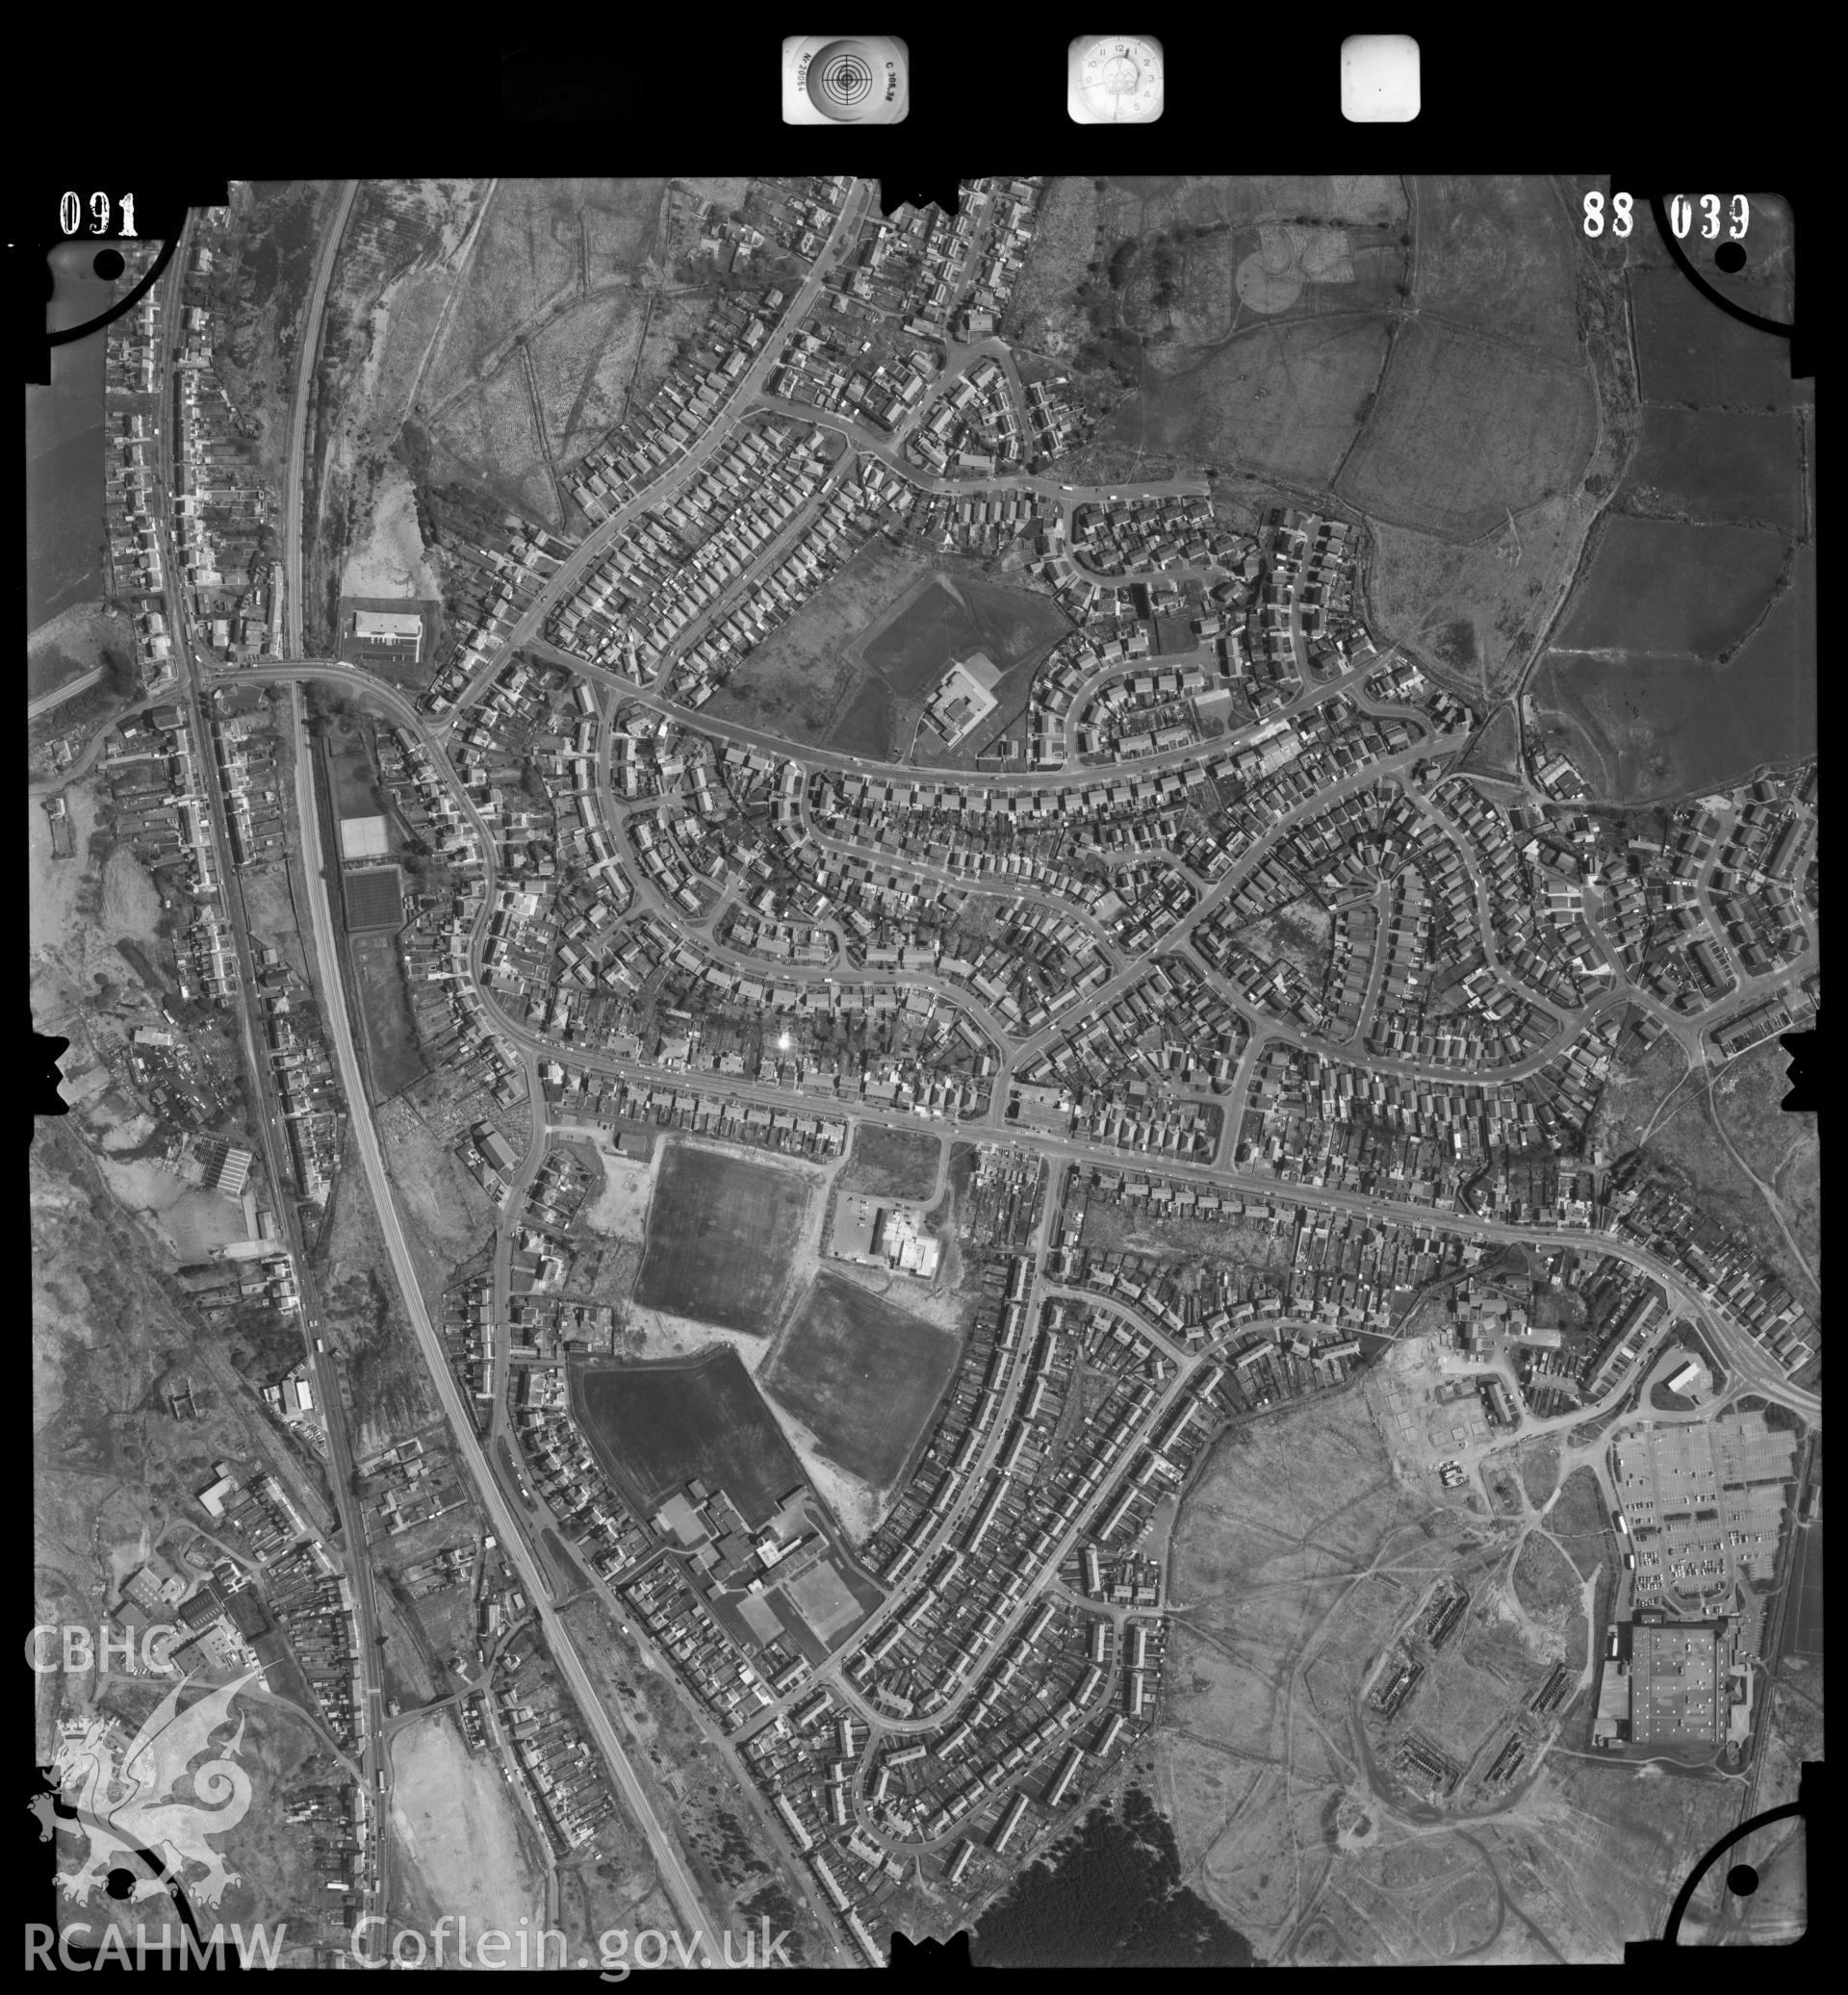 Digitized copy of an aerial photograph showing theTrallwn area  of Swansea, taken by Ordnance Survey, 1988.